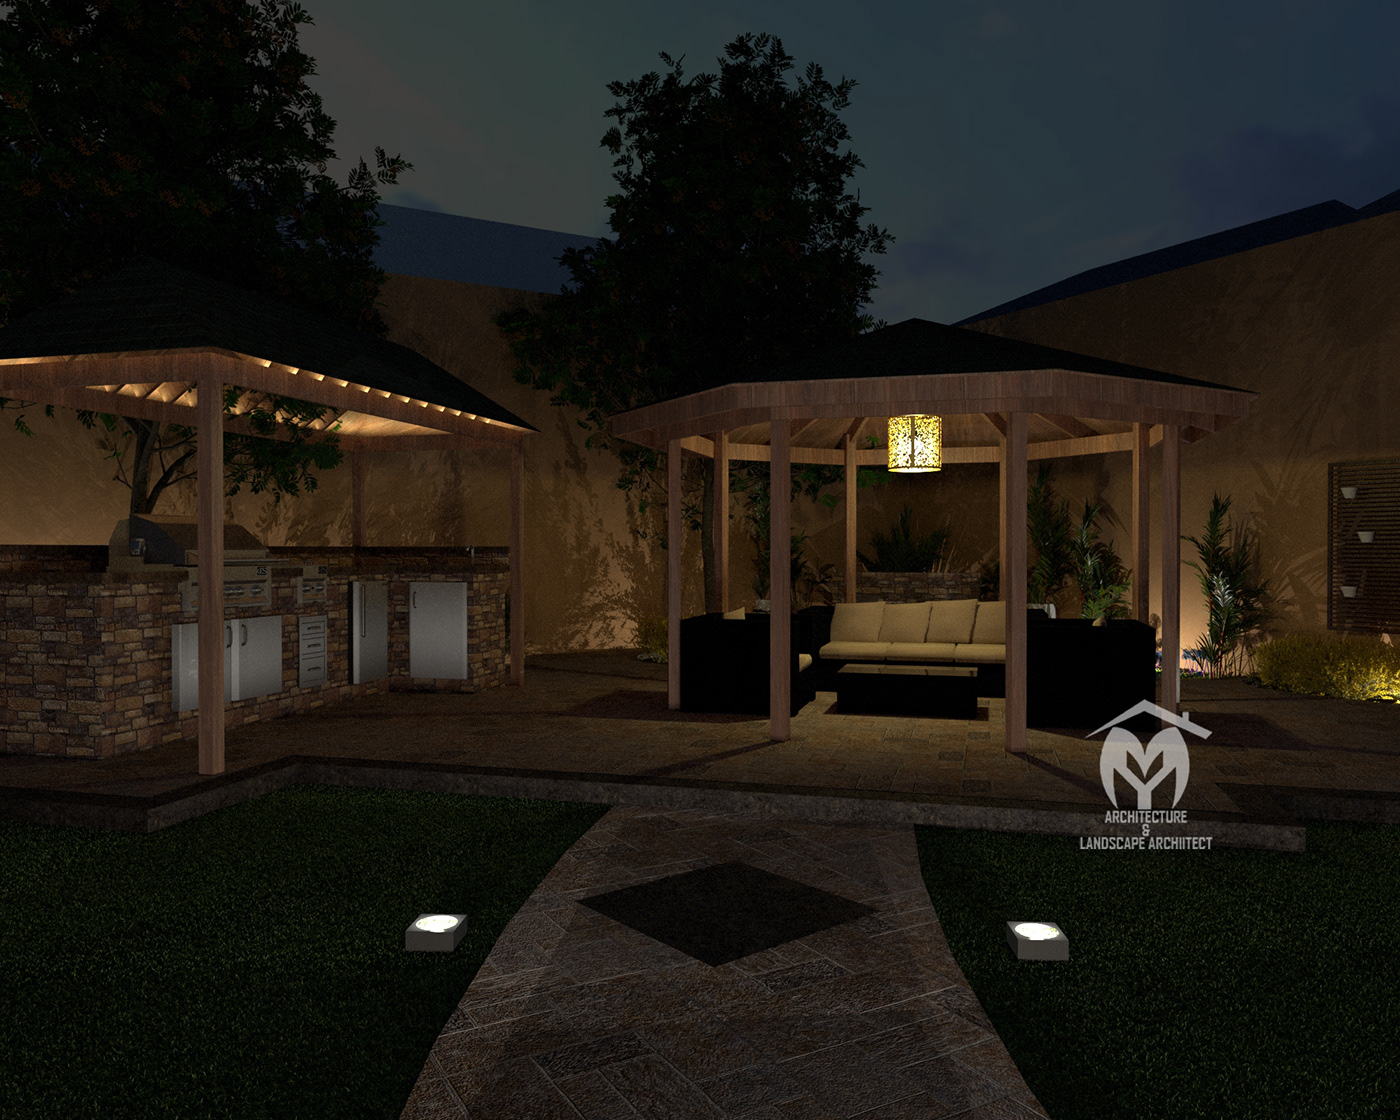 Designing extend of existing house and landscaping front yard Software used @googlesketchup @autocad @chaosgroup for rendering Swipe right 🌹 Ps: to see night shoots much better make your